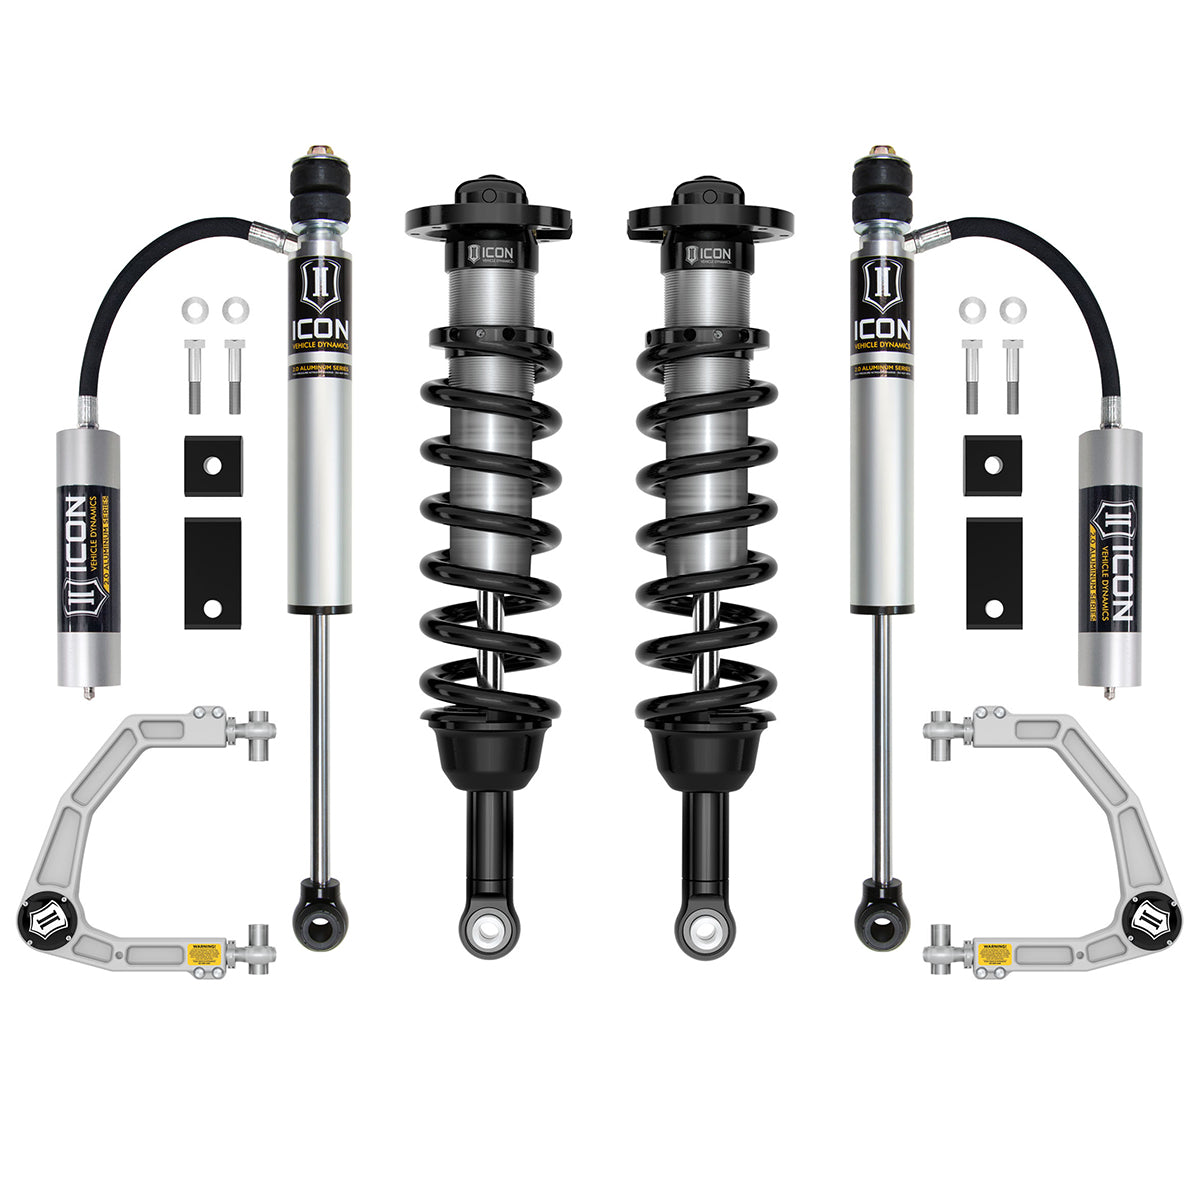 22-23 Toyota Tundra Icon Stage 5 Billet Suspension System parts